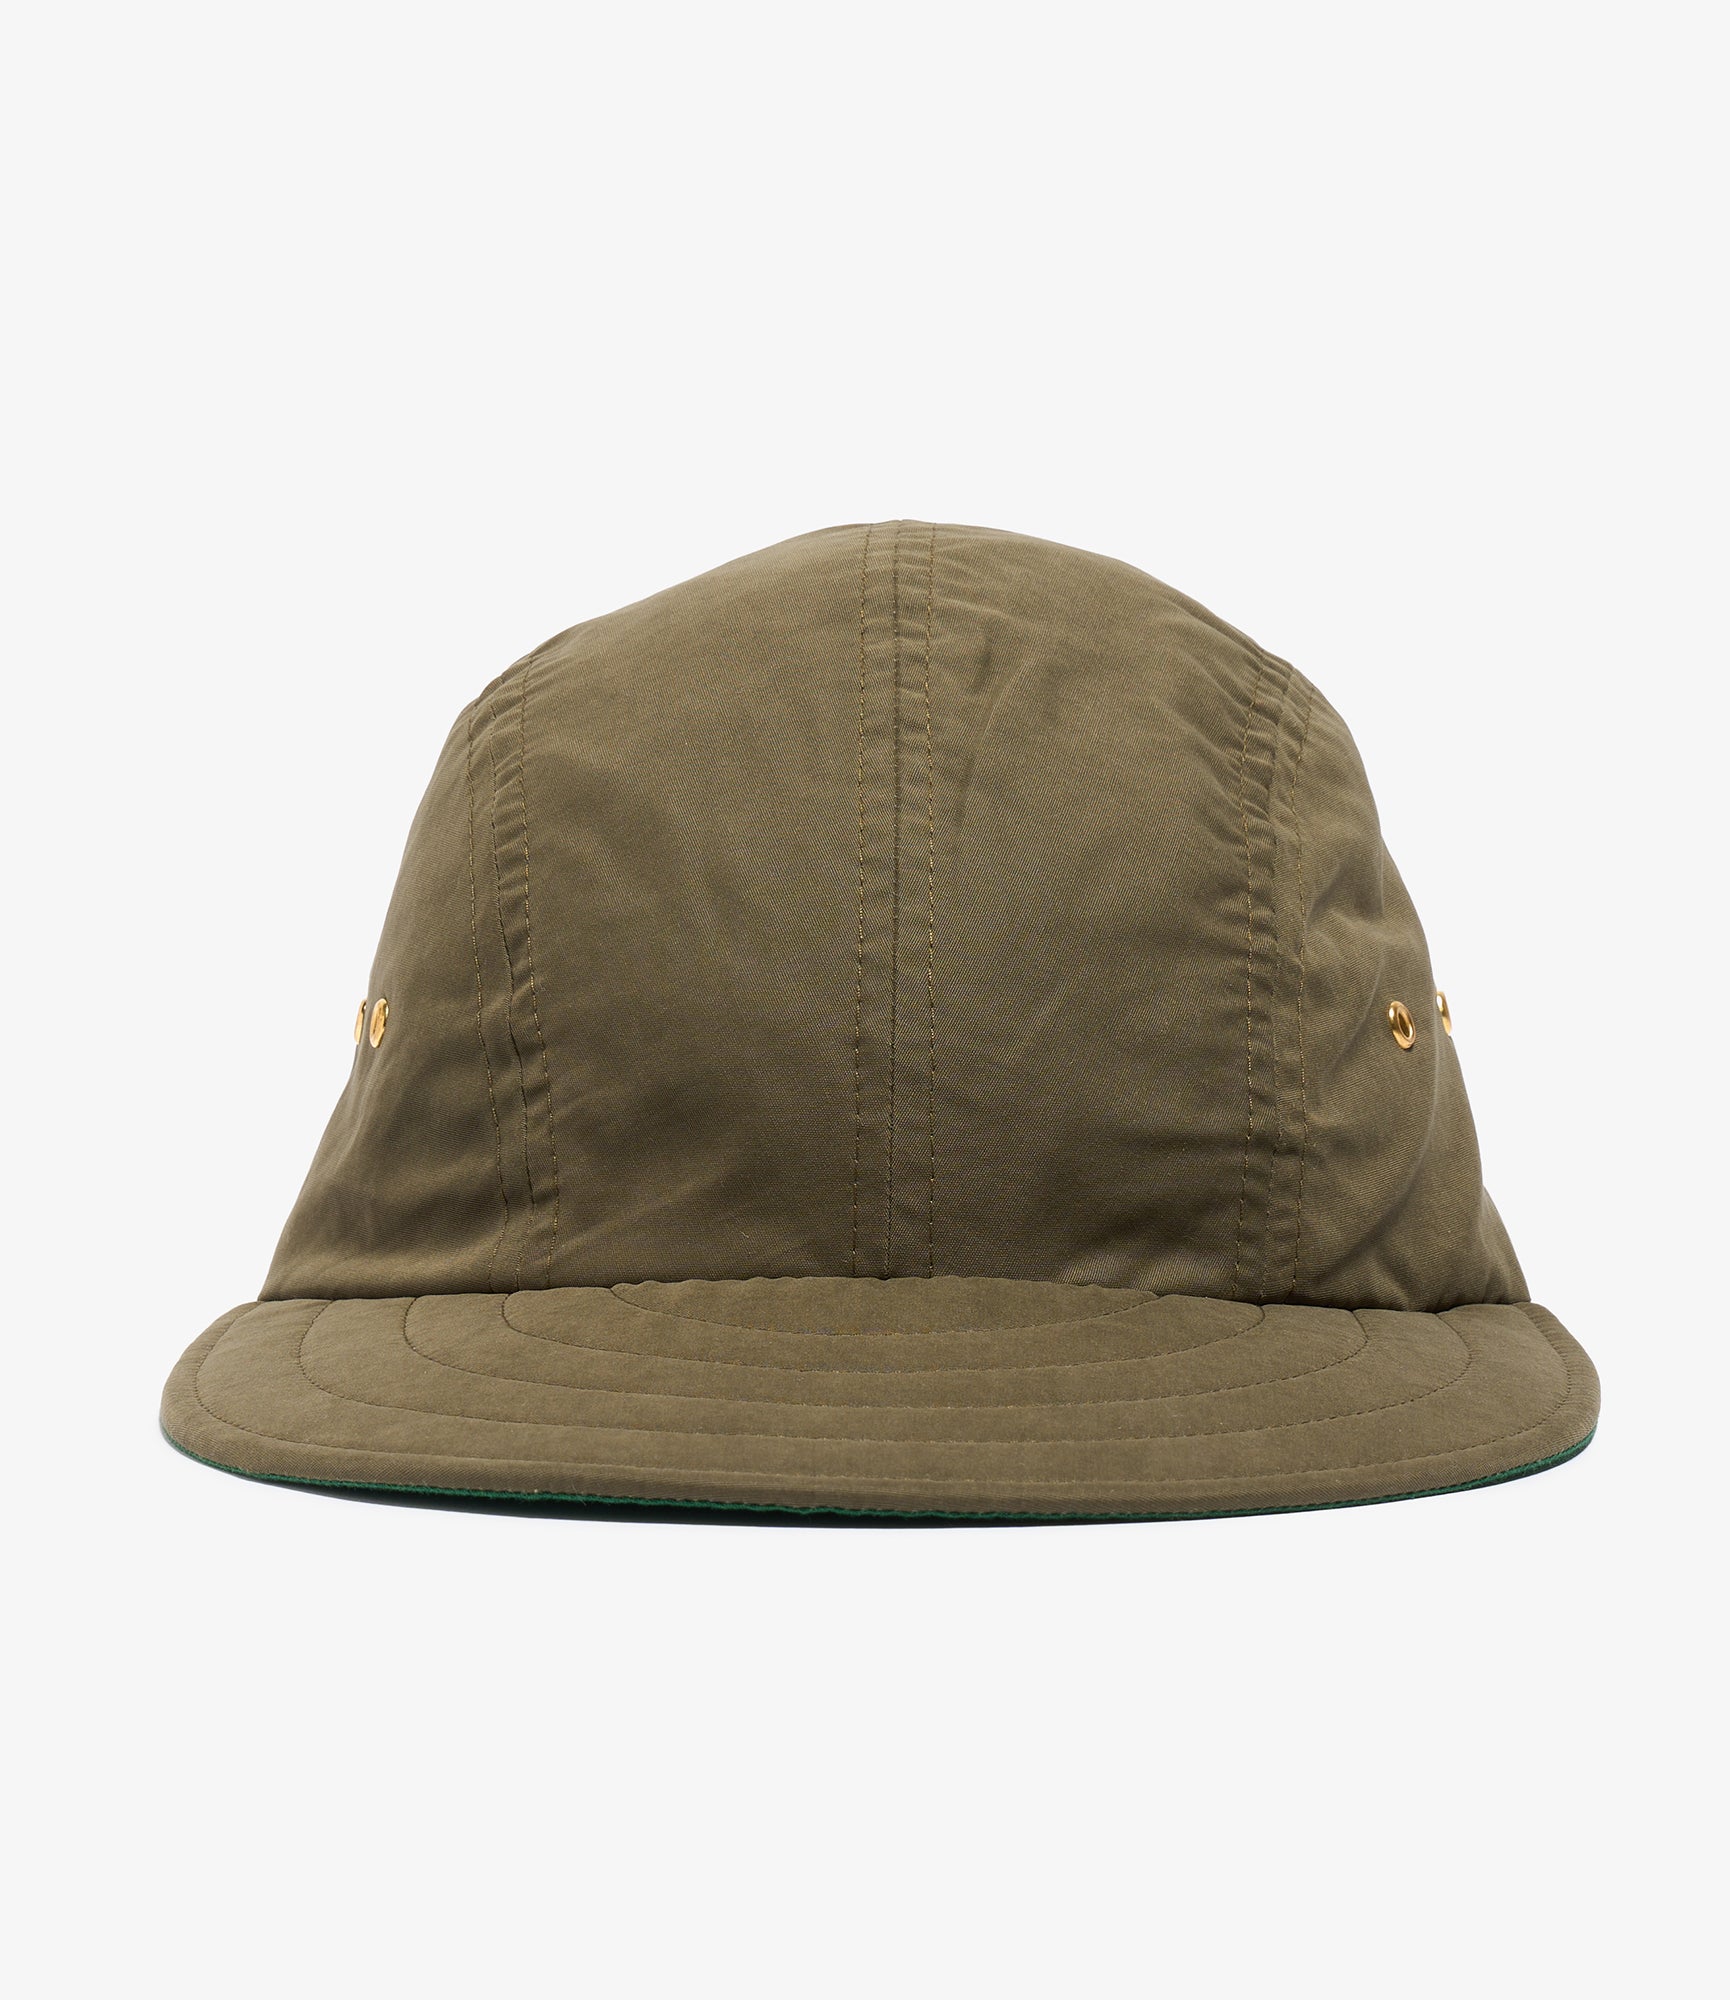 Manager in Training - 4 panel hat - Olive